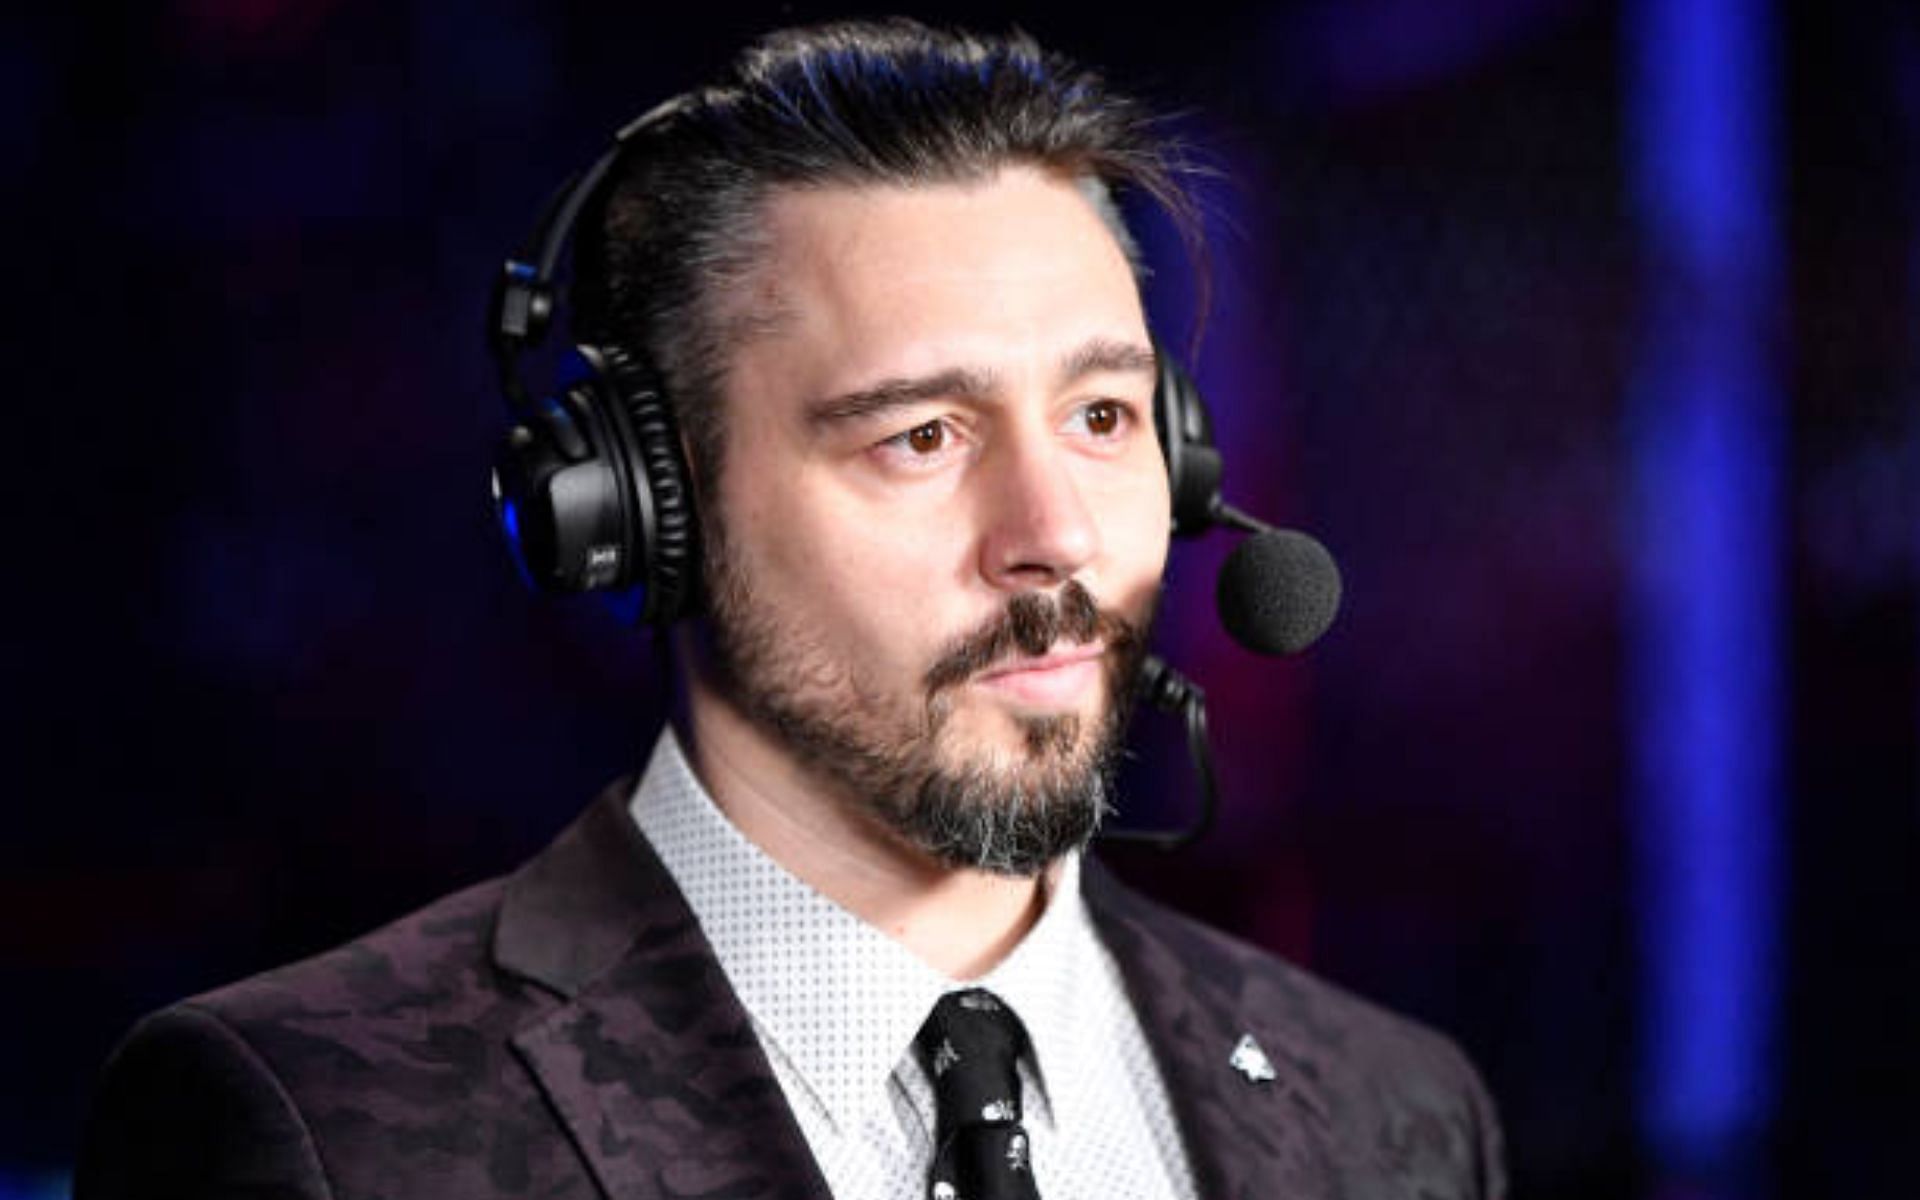 Former UFC fighter and commentator Dan Hardy